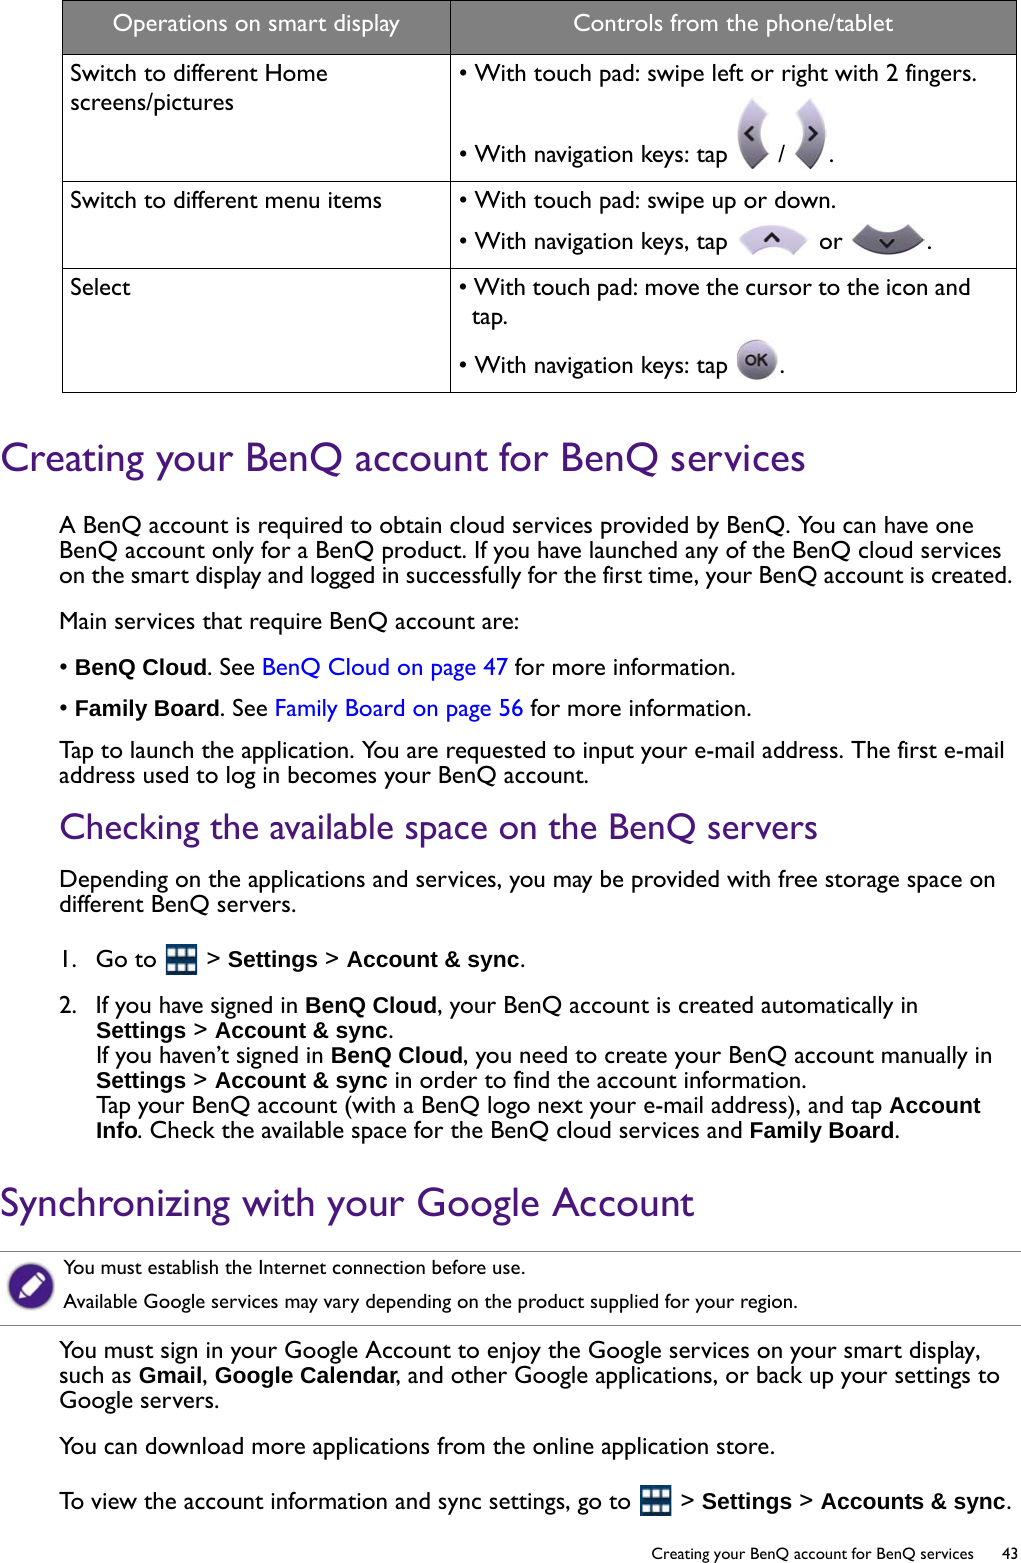   43  Creating your BenQ account for BenQ servicesCreating your BenQ account for BenQ servicesA BenQ account is required to obtain cloud services provided by BenQ. You can have one BenQ account only for a BenQ product. If you have launched any of the BenQ cloud services on the smart display and logged in successfully for the first time, your BenQ account is created. Main services that require BenQ account are:• BenQ Cloud. See BenQ Cloud on page 47 for more information.• Family Board. See Family Board on page 56 for more information.Tap to launch the application. You are requested to input your e-mail address. The first e-mail address used to log in becomes your BenQ account.Checking the available space on the BenQ serversDepending on the applications and services, you may be provided with free storage space on different BenQ servers.1.  Go to   &gt; Settings &gt; Account &amp; sync. 2.  If you have signed in BenQ Cloud, your BenQ account is created automatically in Settings &gt; Account &amp; sync. If you haven’t signed in BenQ Cloud, you need to create your BenQ account manually in Settings &gt; Account &amp; sync in order to find the account information.Tap your BenQ account (with a BenQ logo next your e-mail address), and tap Account Info. Check the available space for the BenQ cloud services and Family Board.Synchronizing with your Google AccountYou must sign in your Google Account to enjoy the Google services on your smart display, such as Gmail, Google Calendar, and other Google applications, or back up your settings to Google servers.You can download more applications from the online application store.To view the account information and sync settings, go to   &gt; Settings &gt; Accounts &amp; sync.Switch to different Home screens/pictures• With touch pad: swipe left or right with 2 fingers.• With navigation keys: tap   /  .Switch to different menu items • With touch pad: swipe up or down.• With navigation keys, tap   or  .Select • With touch pad: move the cursor to the icon and tap.• With navigation keys: tap  .Operations on smart display Controls from the phone/tabletYou must establish the Internet connection before use.Available Google services may vary depending on the product supplied for your region.